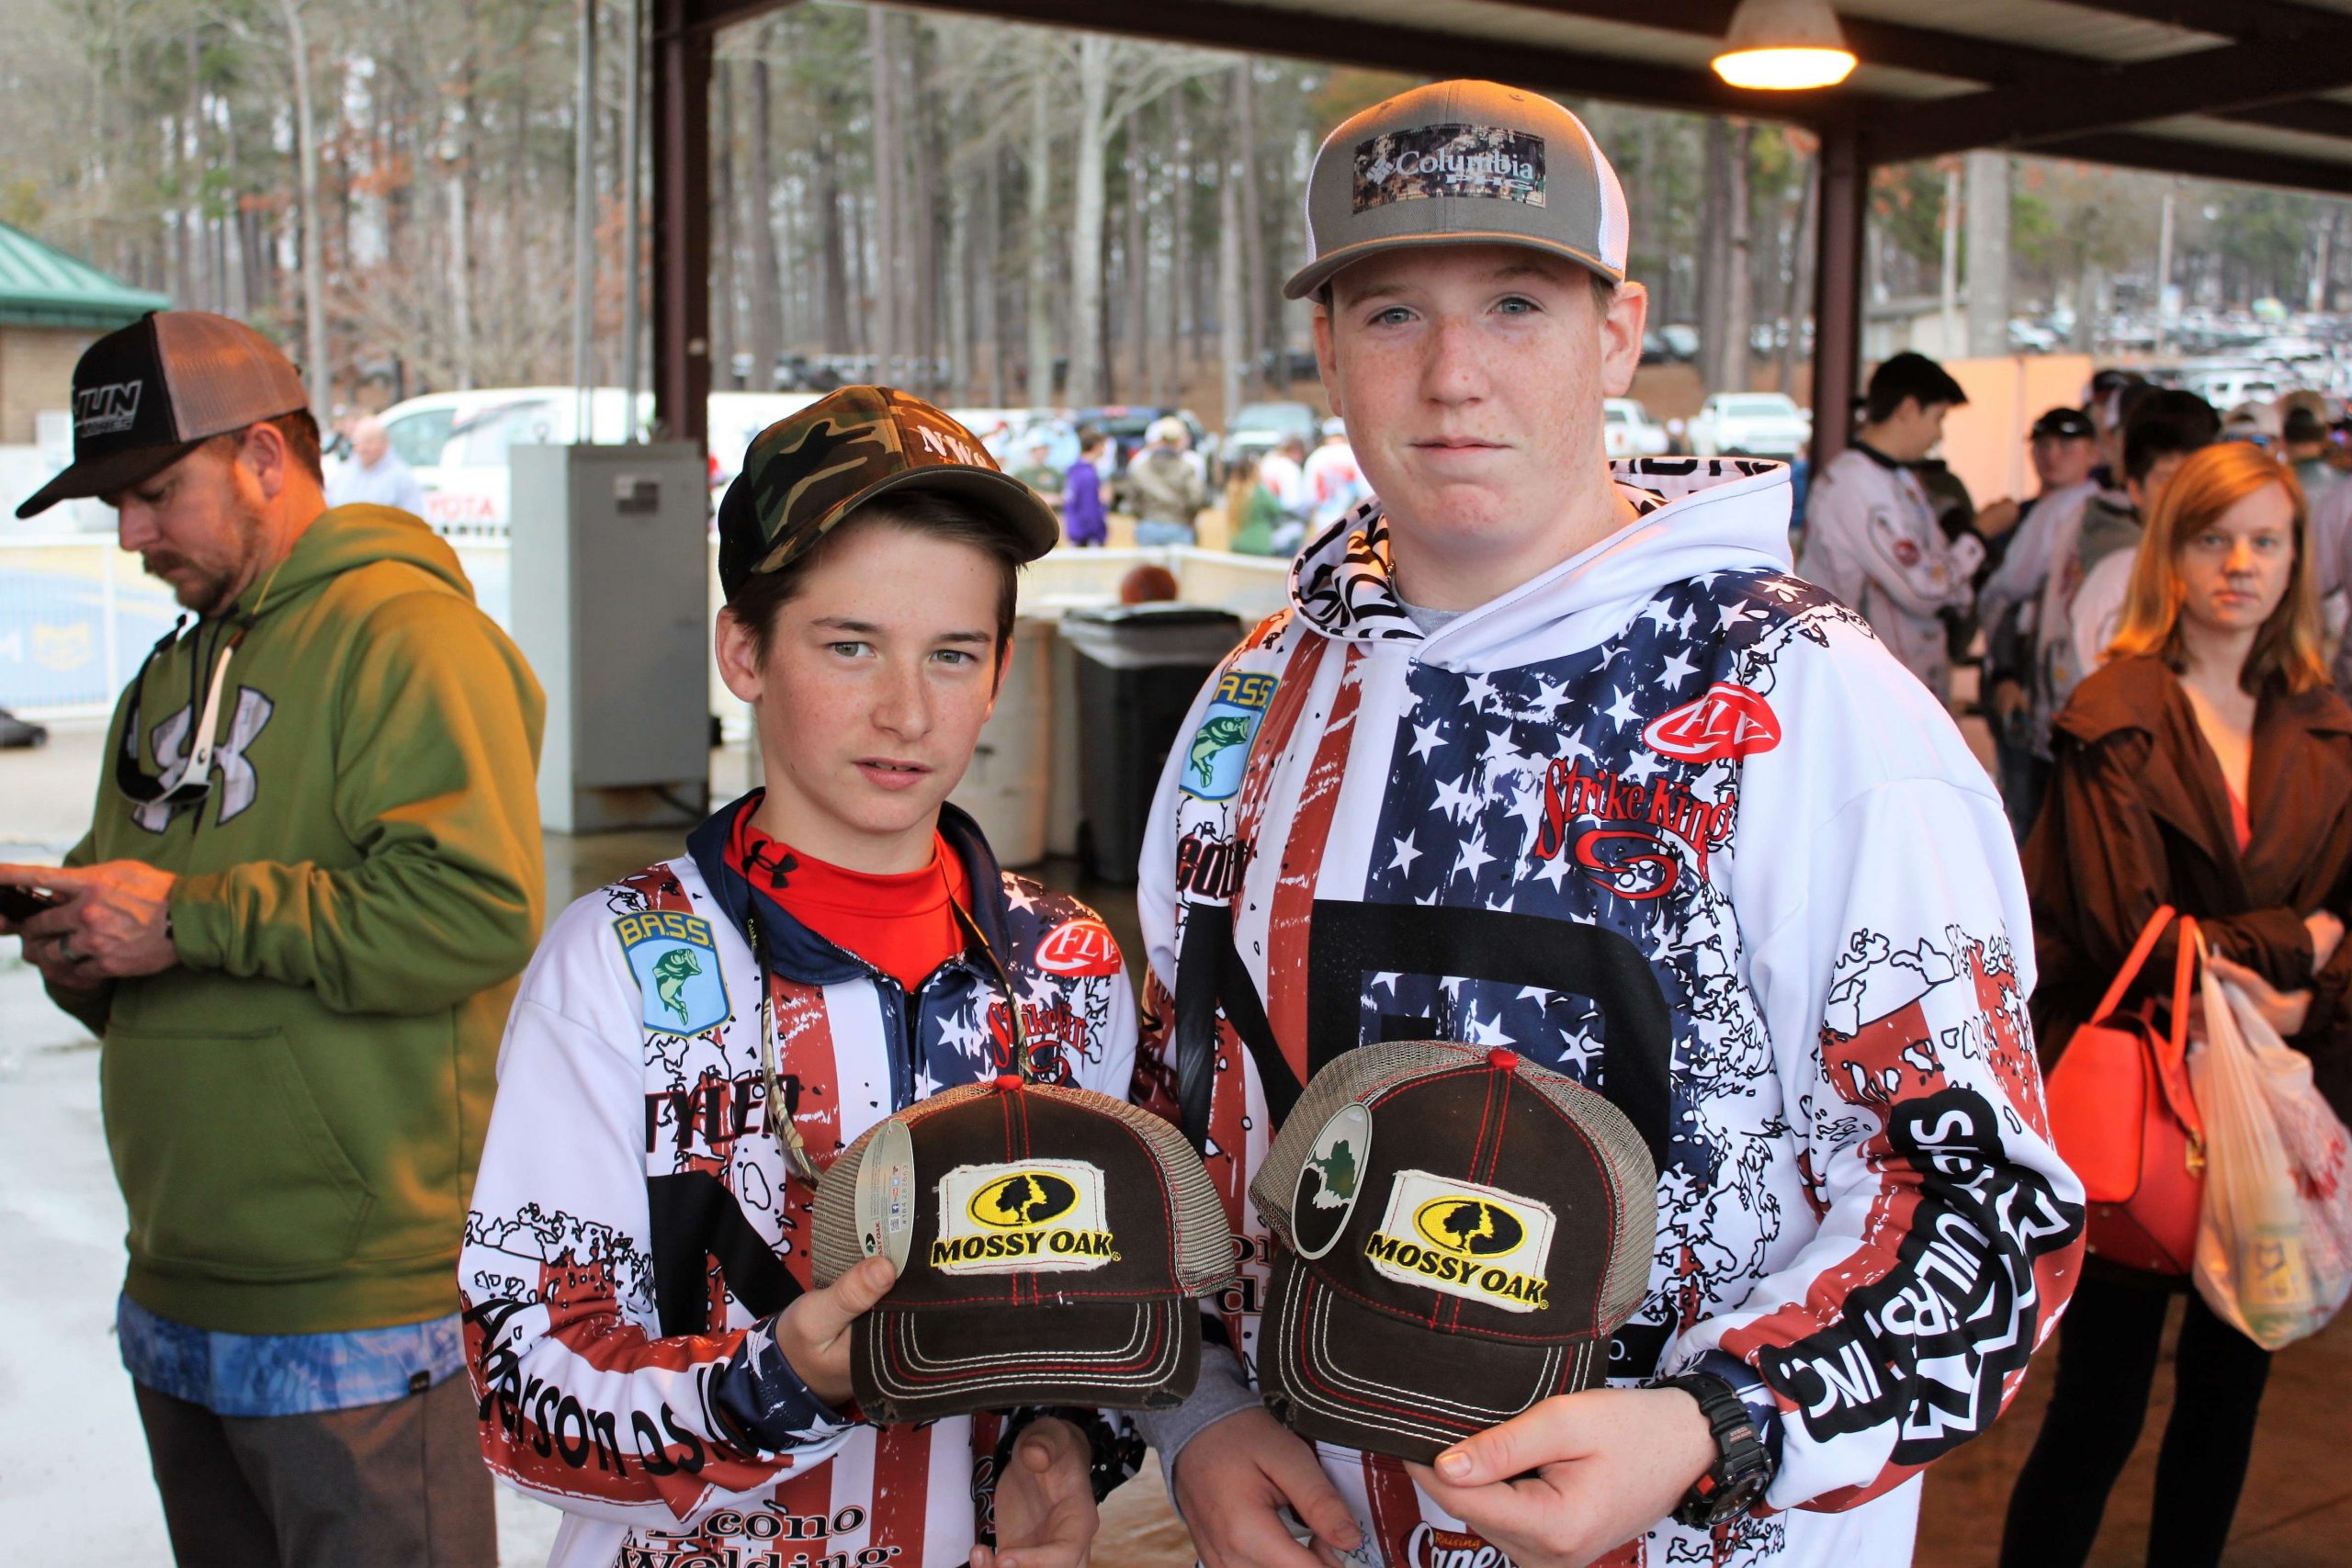 This pair of North Desoto (LA) anglers like their Mossy Oak lids too.